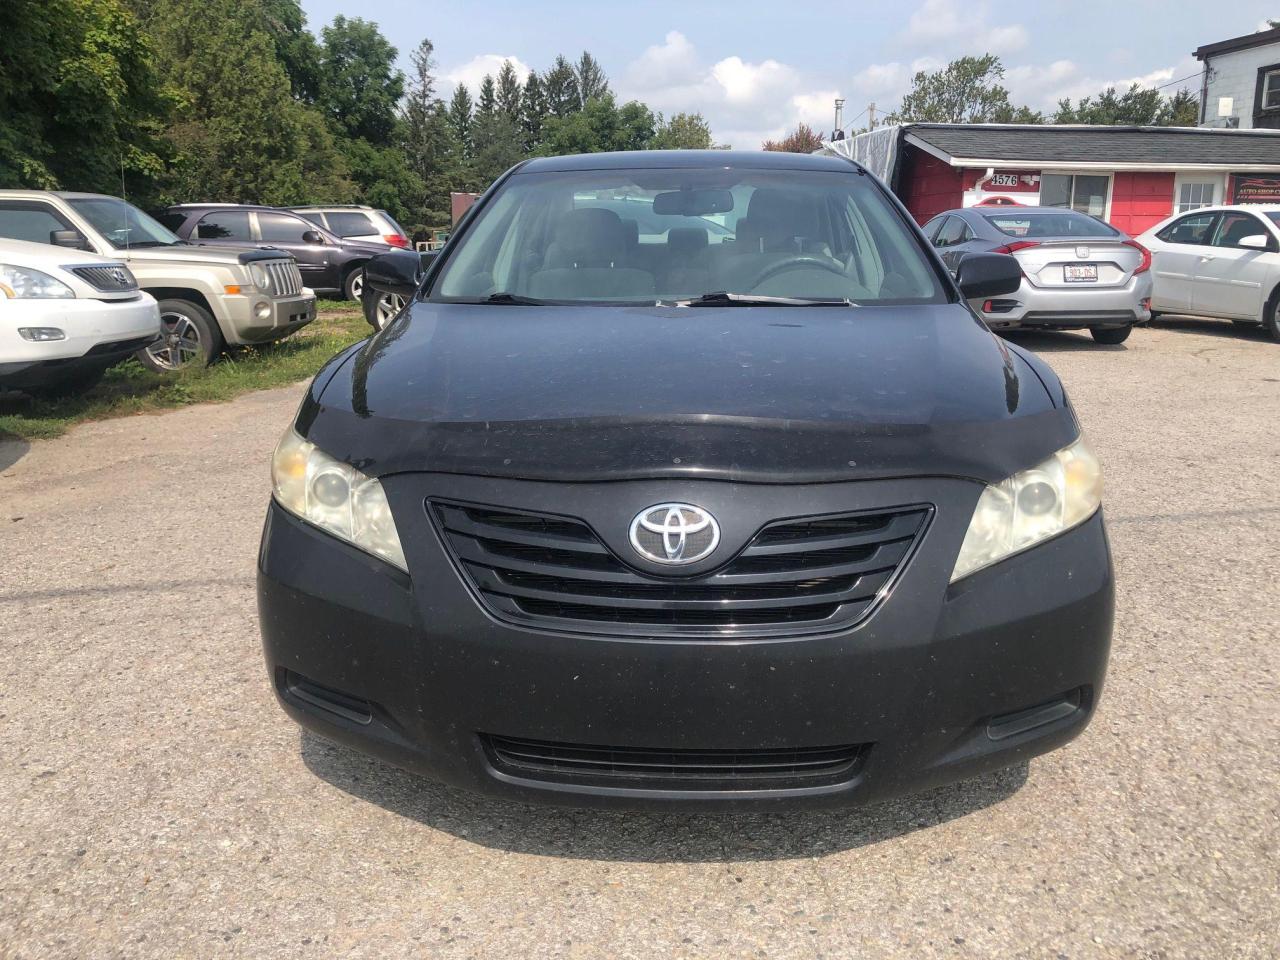 2007 Toyota Camry 4dr Sdn I4 Auto LE**Clean Drives Great*4 Cylinder* - Photo #3